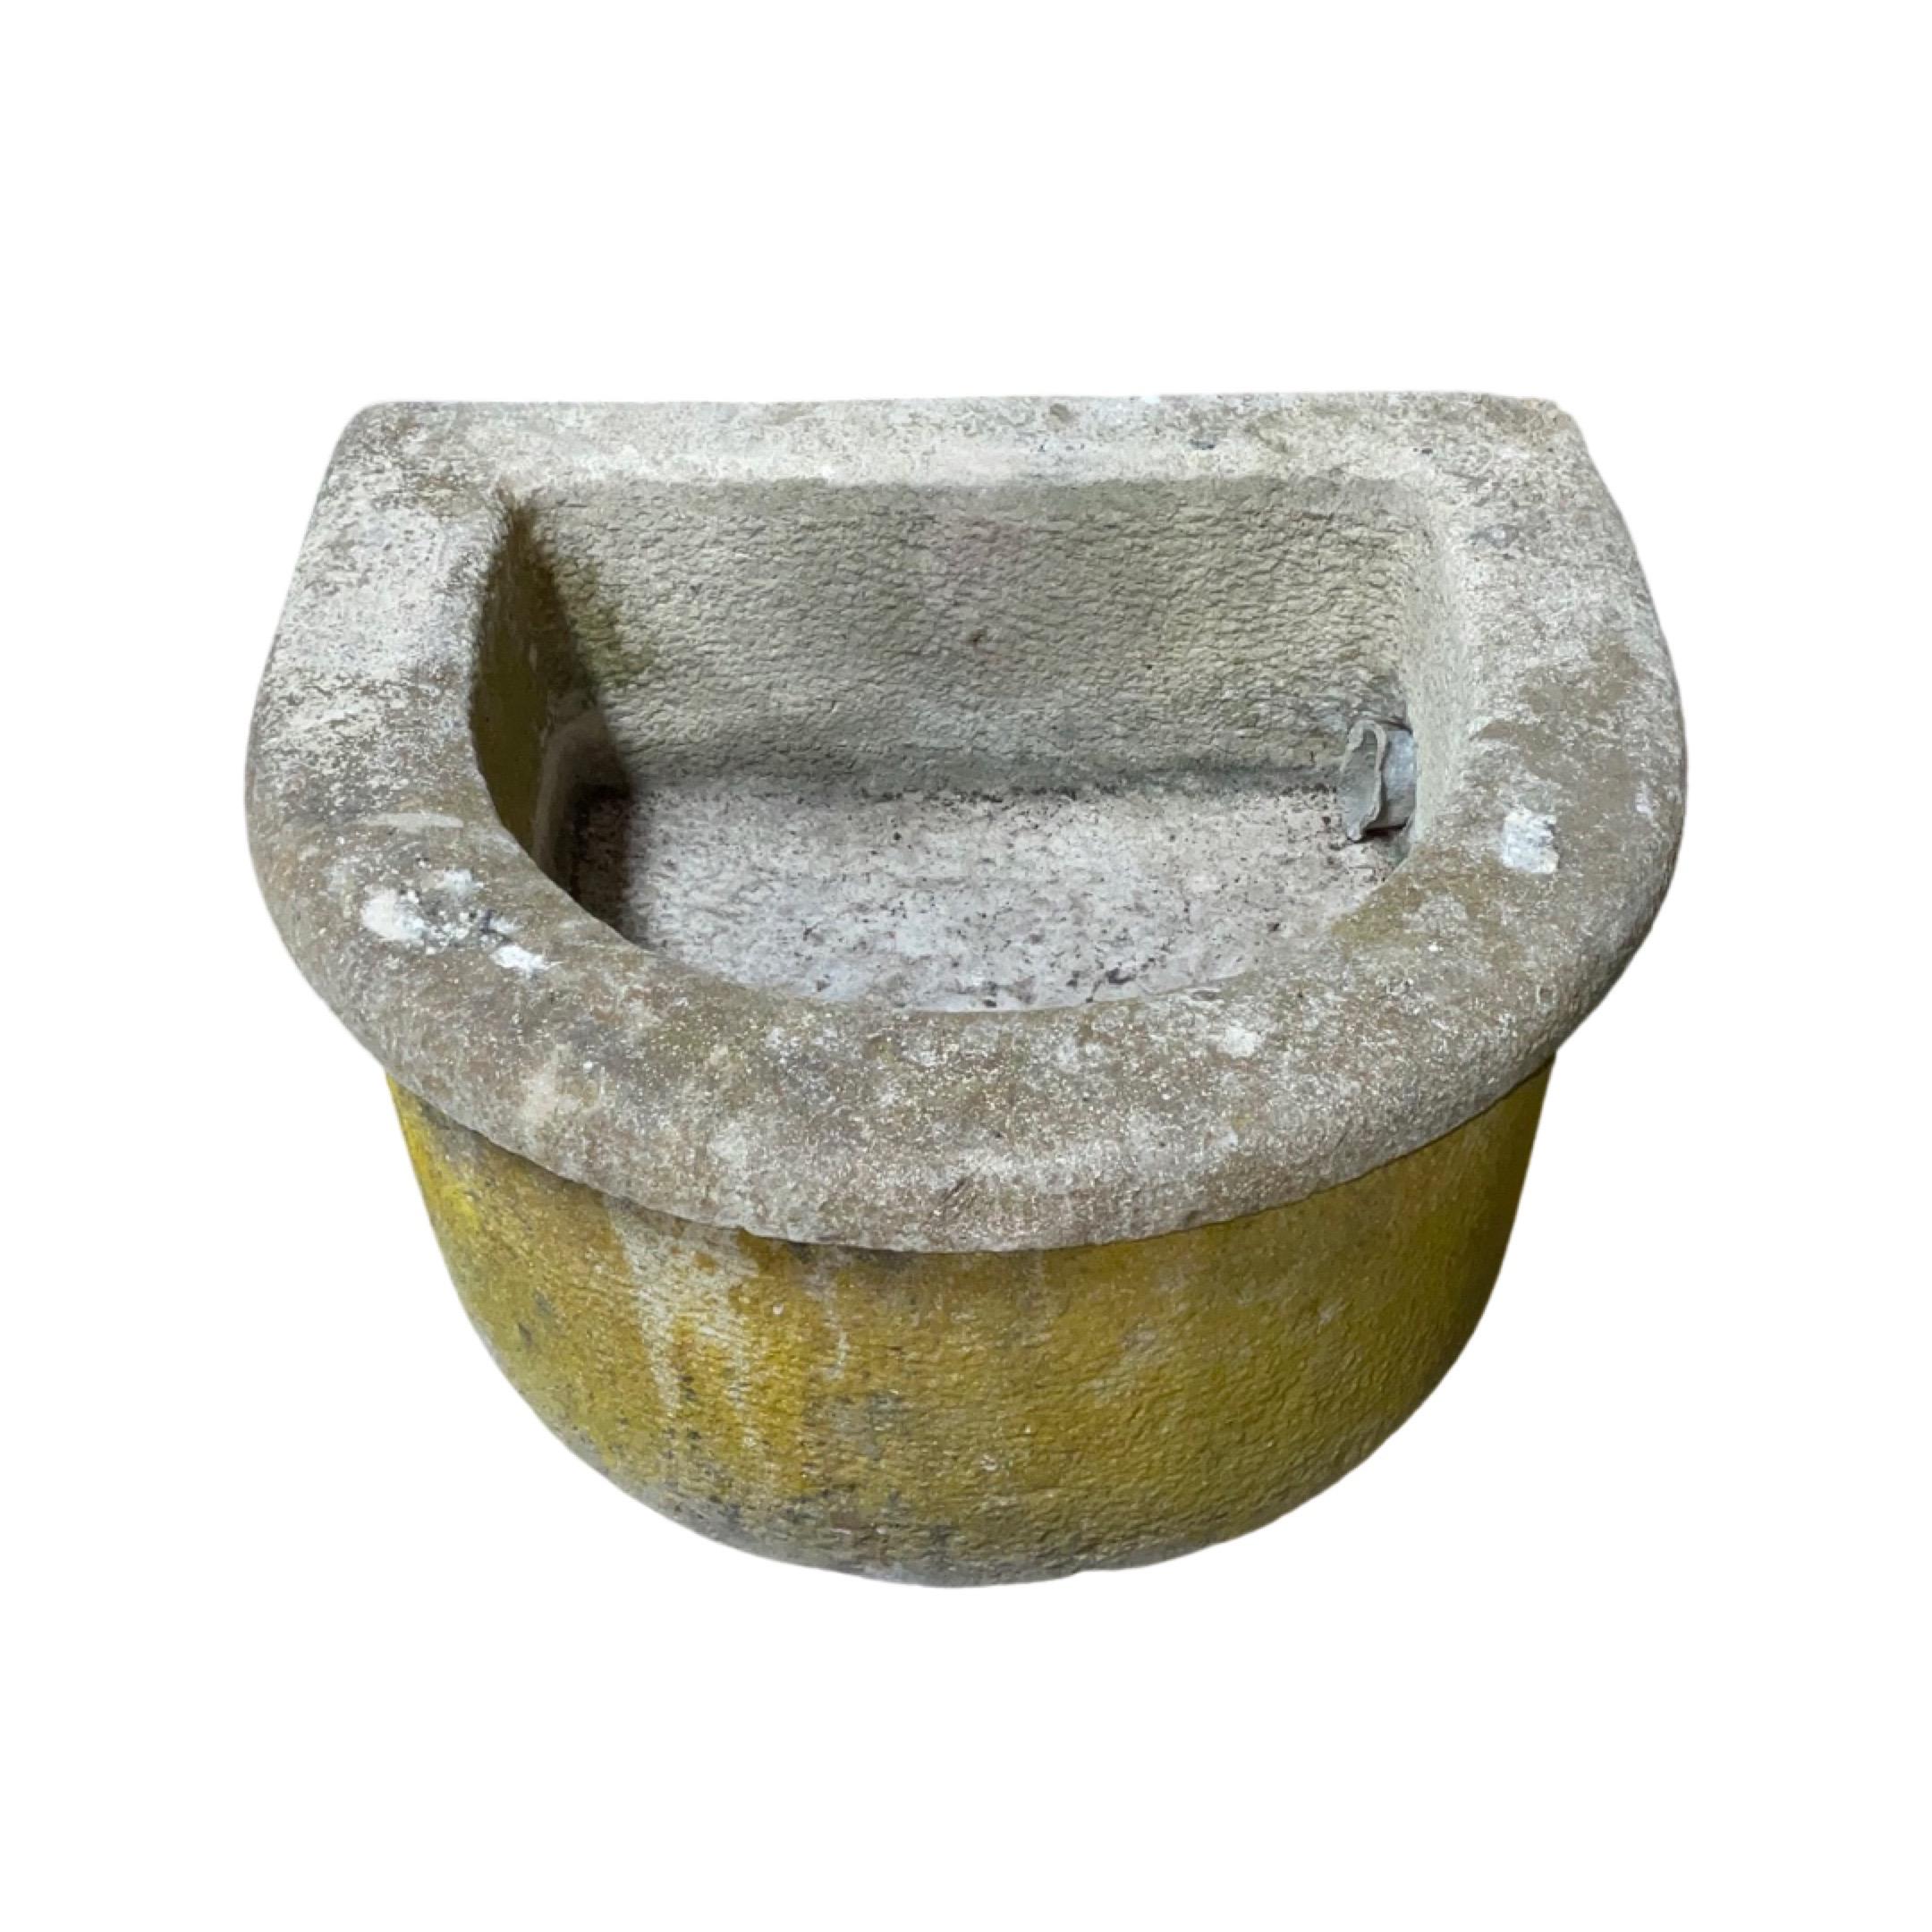 Round-edged sink. Made out of Burgundy stone. Originates from France.